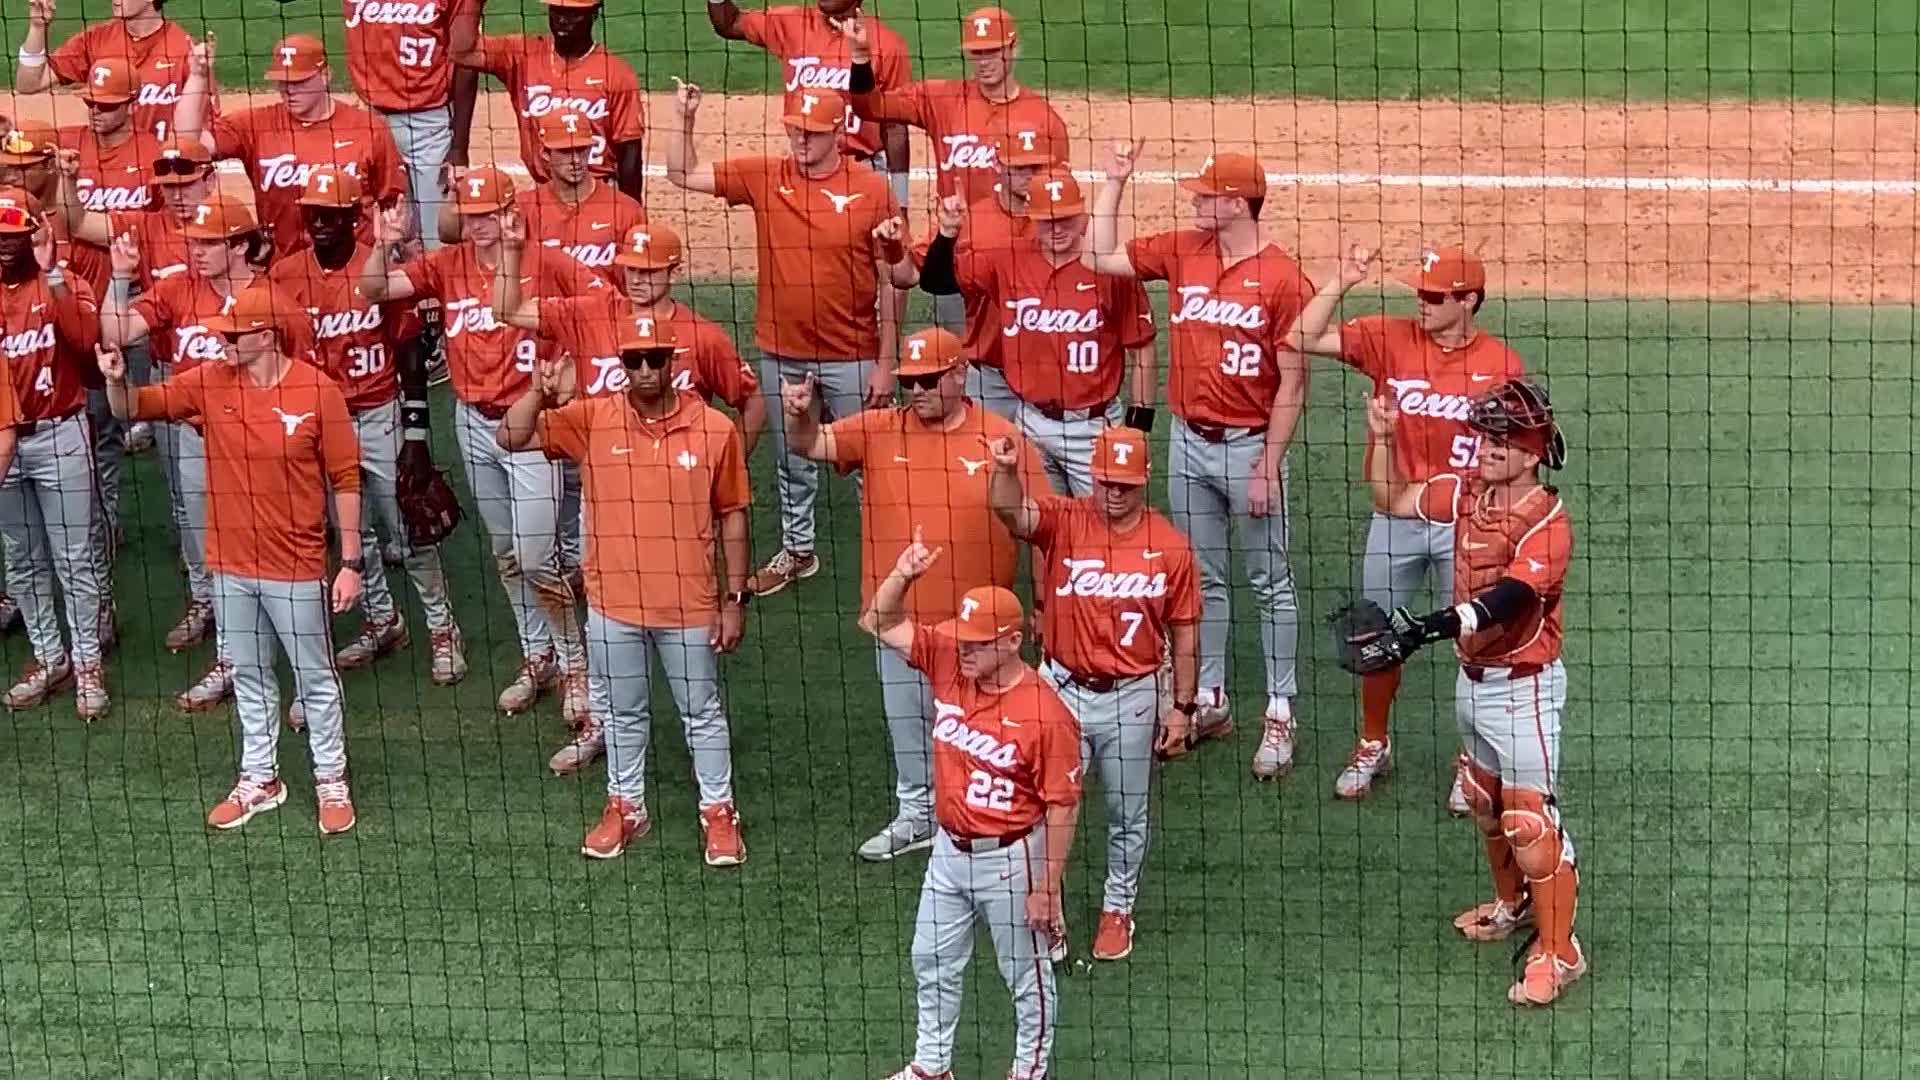 Texas players salute their fans after a 10-7 win over Central Florida on Sunday clinched the Longhorns' fifth consecutive Big 12 series victory. (KXAN photo)